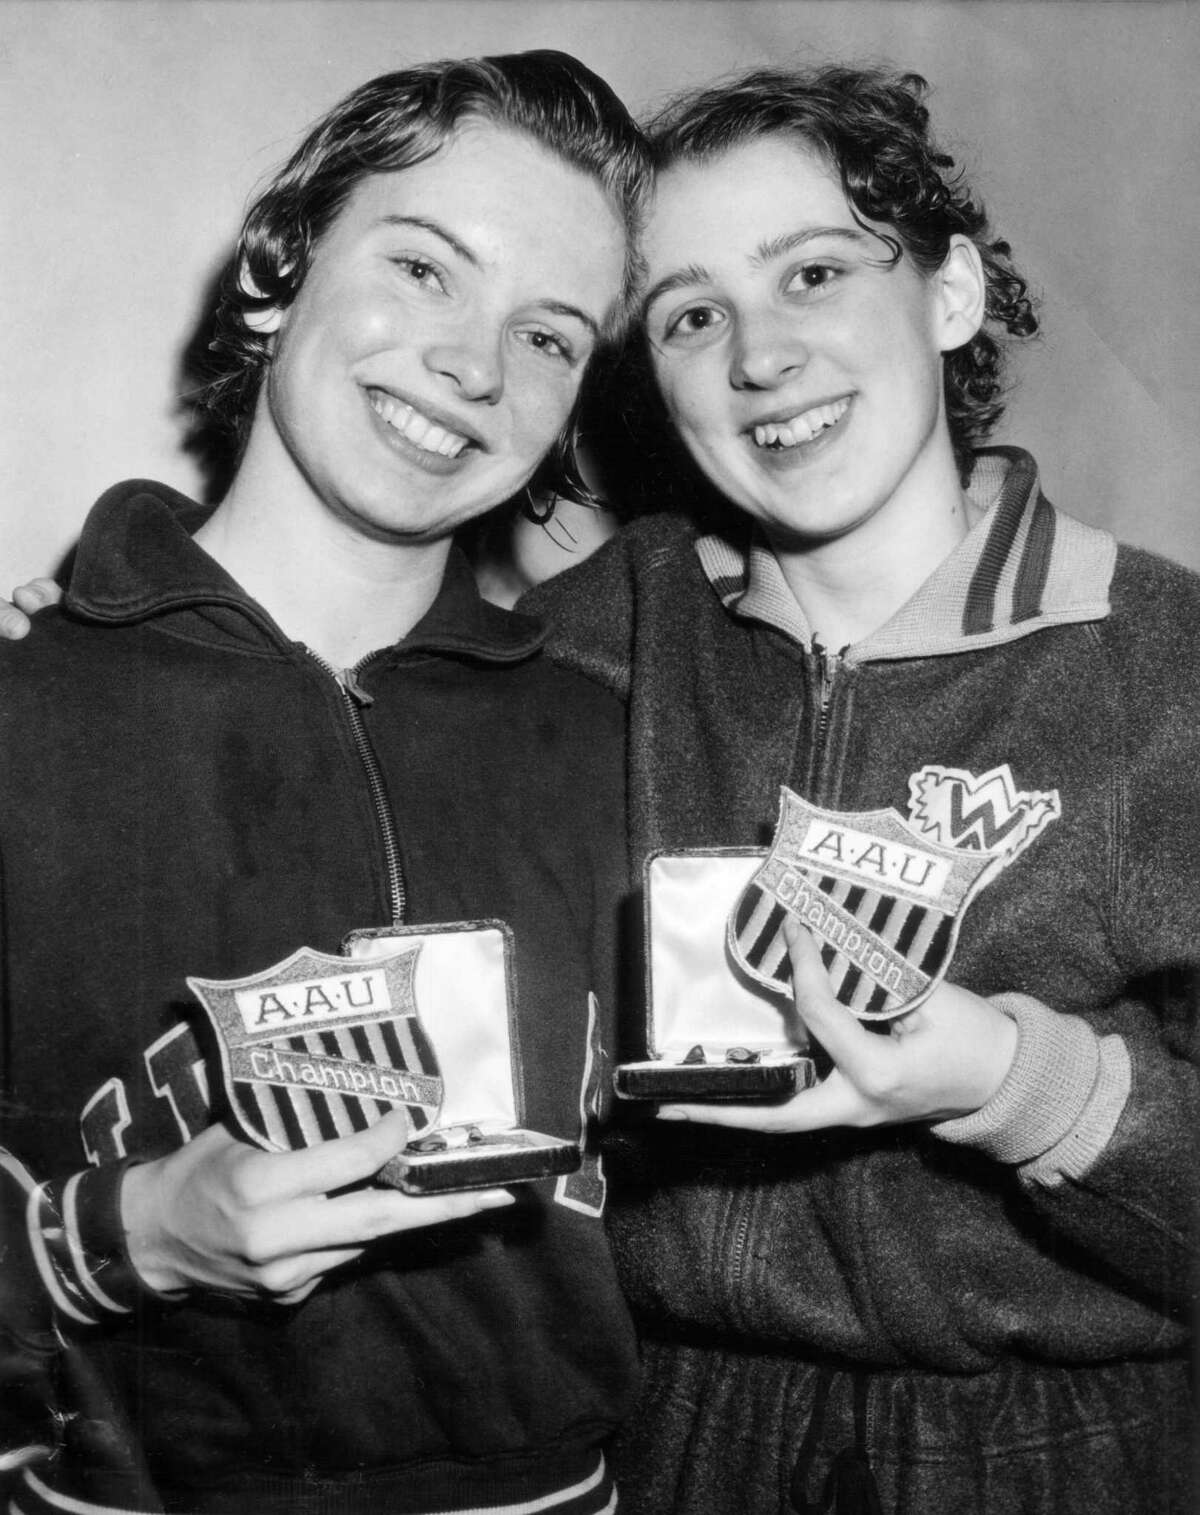 Carin Cone, left, of Ridgewood, N.J. and Nancy Ramey, Washington Athletic Club of Seattle as they pose with their awards for setting new AAU and American records in the final night of the Women's National AAU Indoor Swimming meet in Dallas, Texas, April 12, 1958.